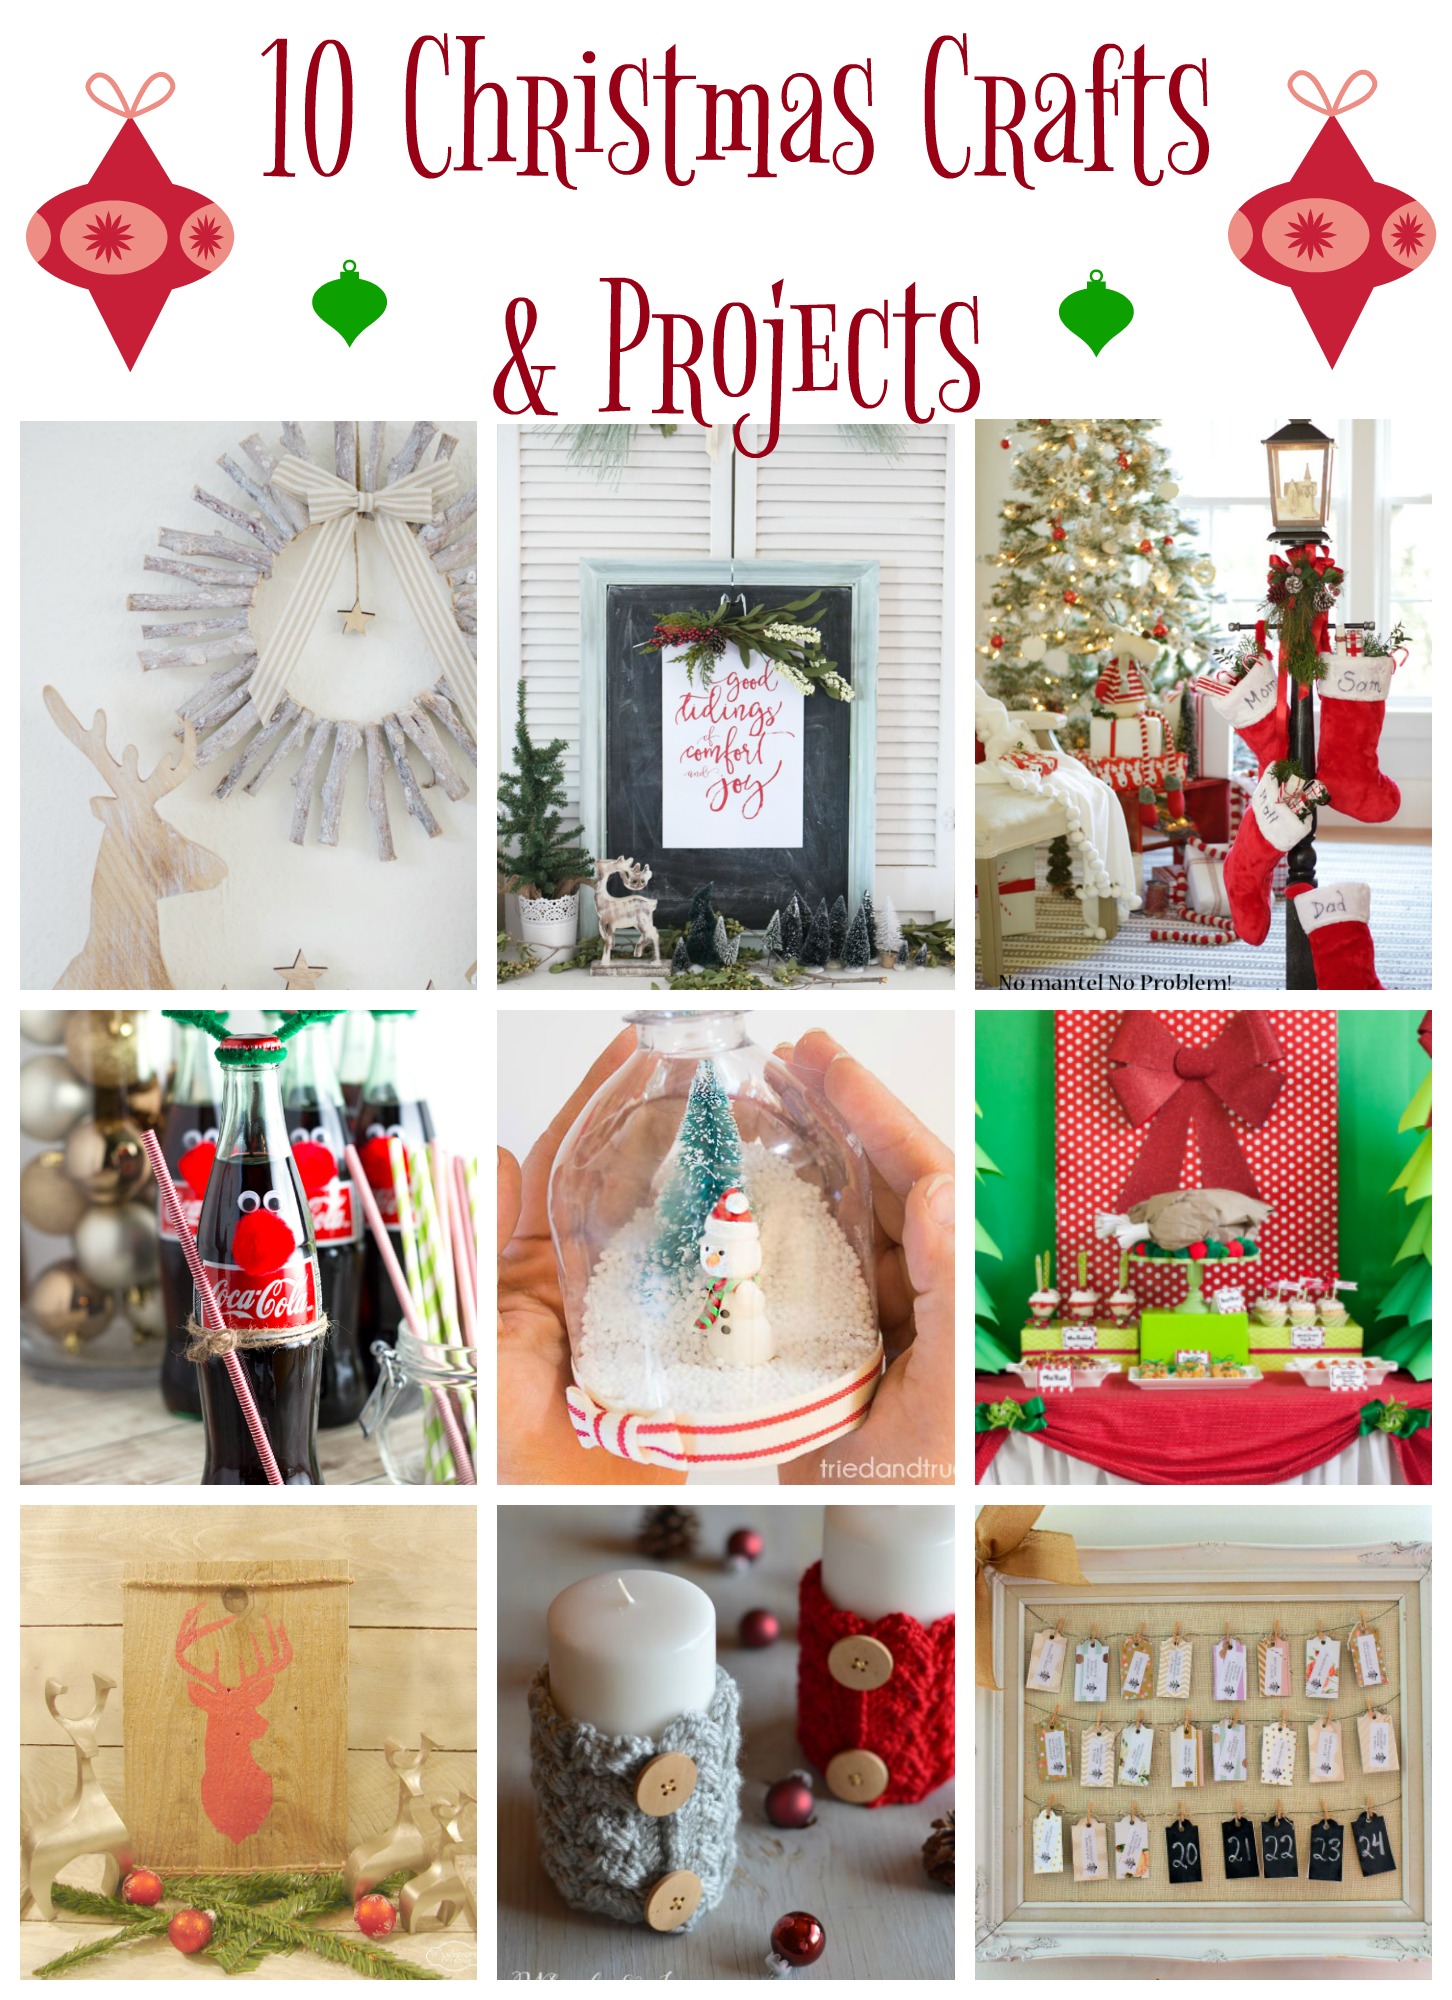 10 Christmas Projects and Crafts - My Uncommon Slice of Suburbia